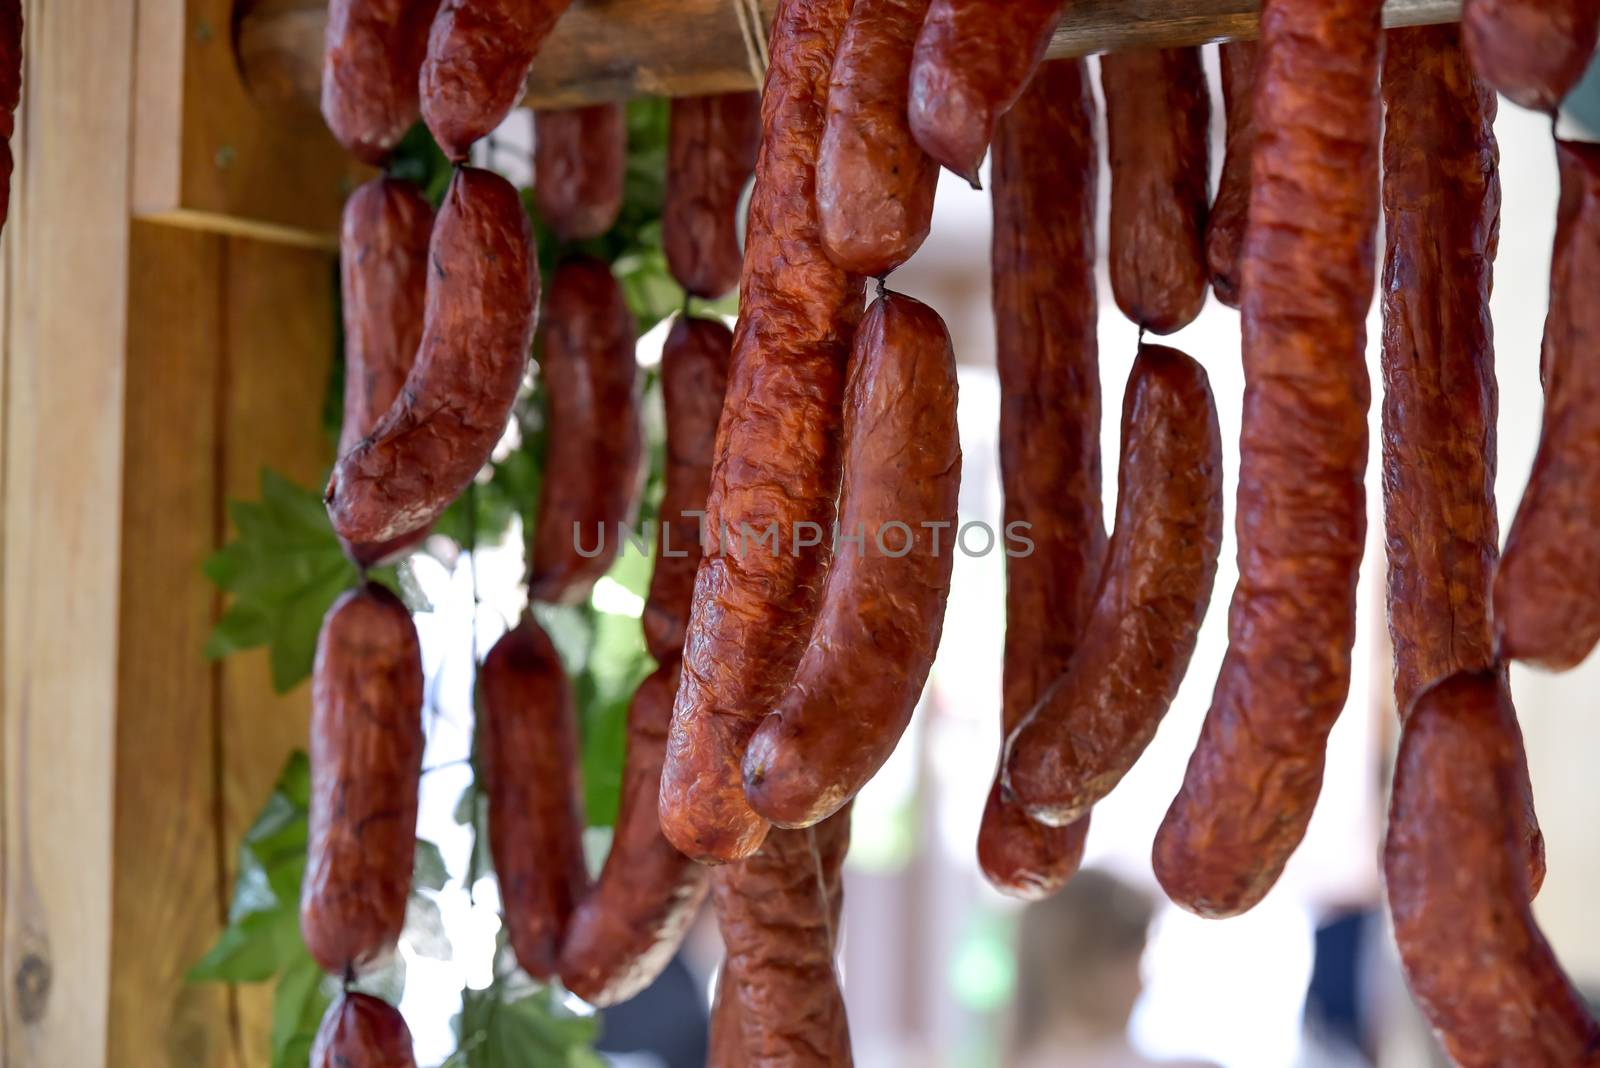 different sorts of sausages by RobertChlopas